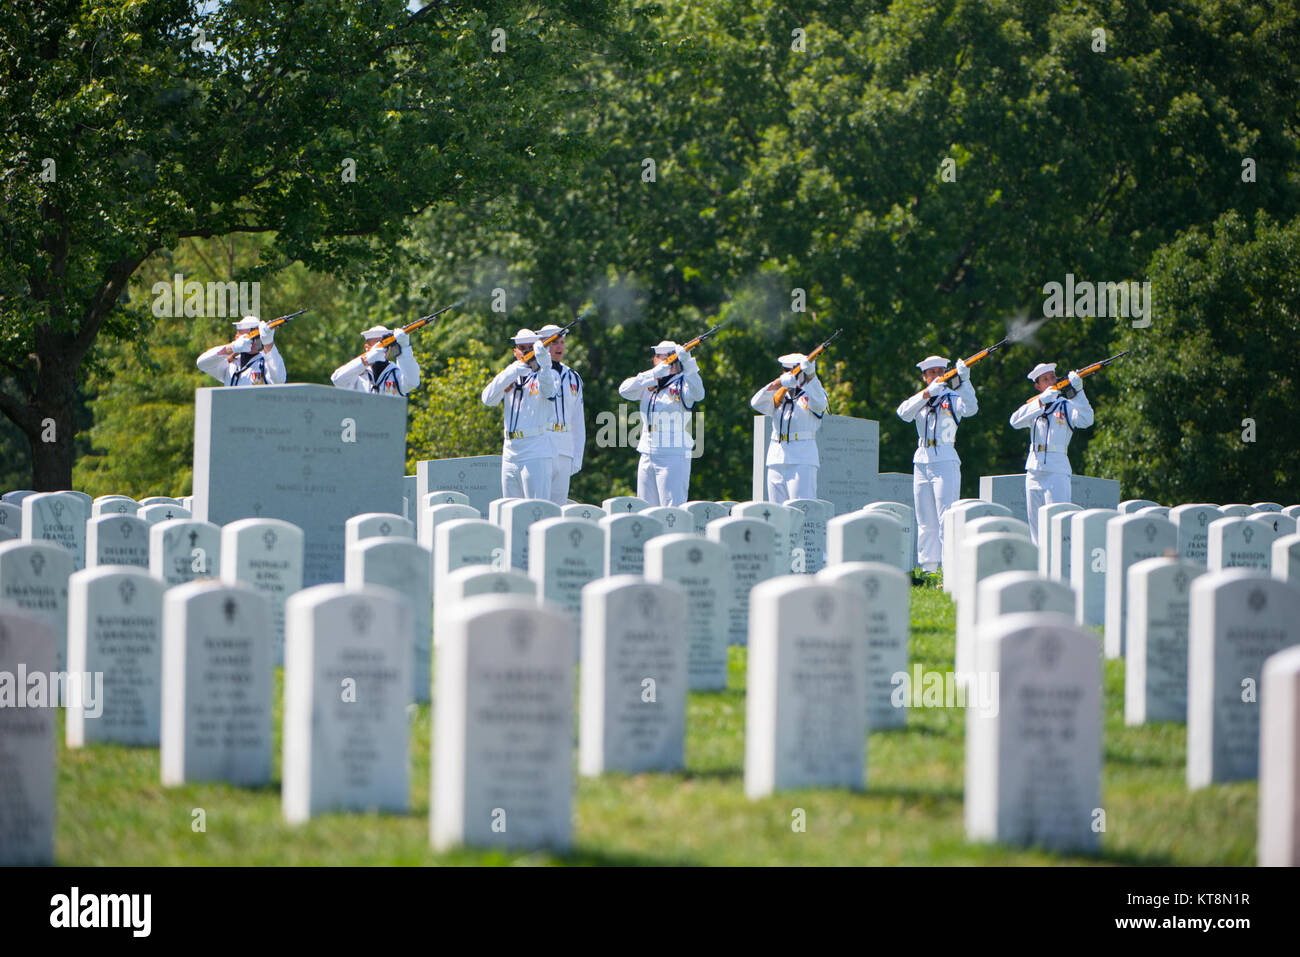 The U.S. Navy Honor Guard participates in the graveside service for U.S. Navy Petty Officer 1st Class Xavier A. Martin at Arlington National Cemetery, Arlington, Va., Aug. 9, 2017.  Martin perished when the USS Fitzgerald (DDG 62) was involved in a collision with the Philippine-flagged merchant vessel ACX Crystal, flooding the berthing compartment he was occupying.  Martin was buried with standard honors in Section 60. (U.S. Army photo by Elizabeth Fraser / Arlington National Cemetery / released) Stock Photo